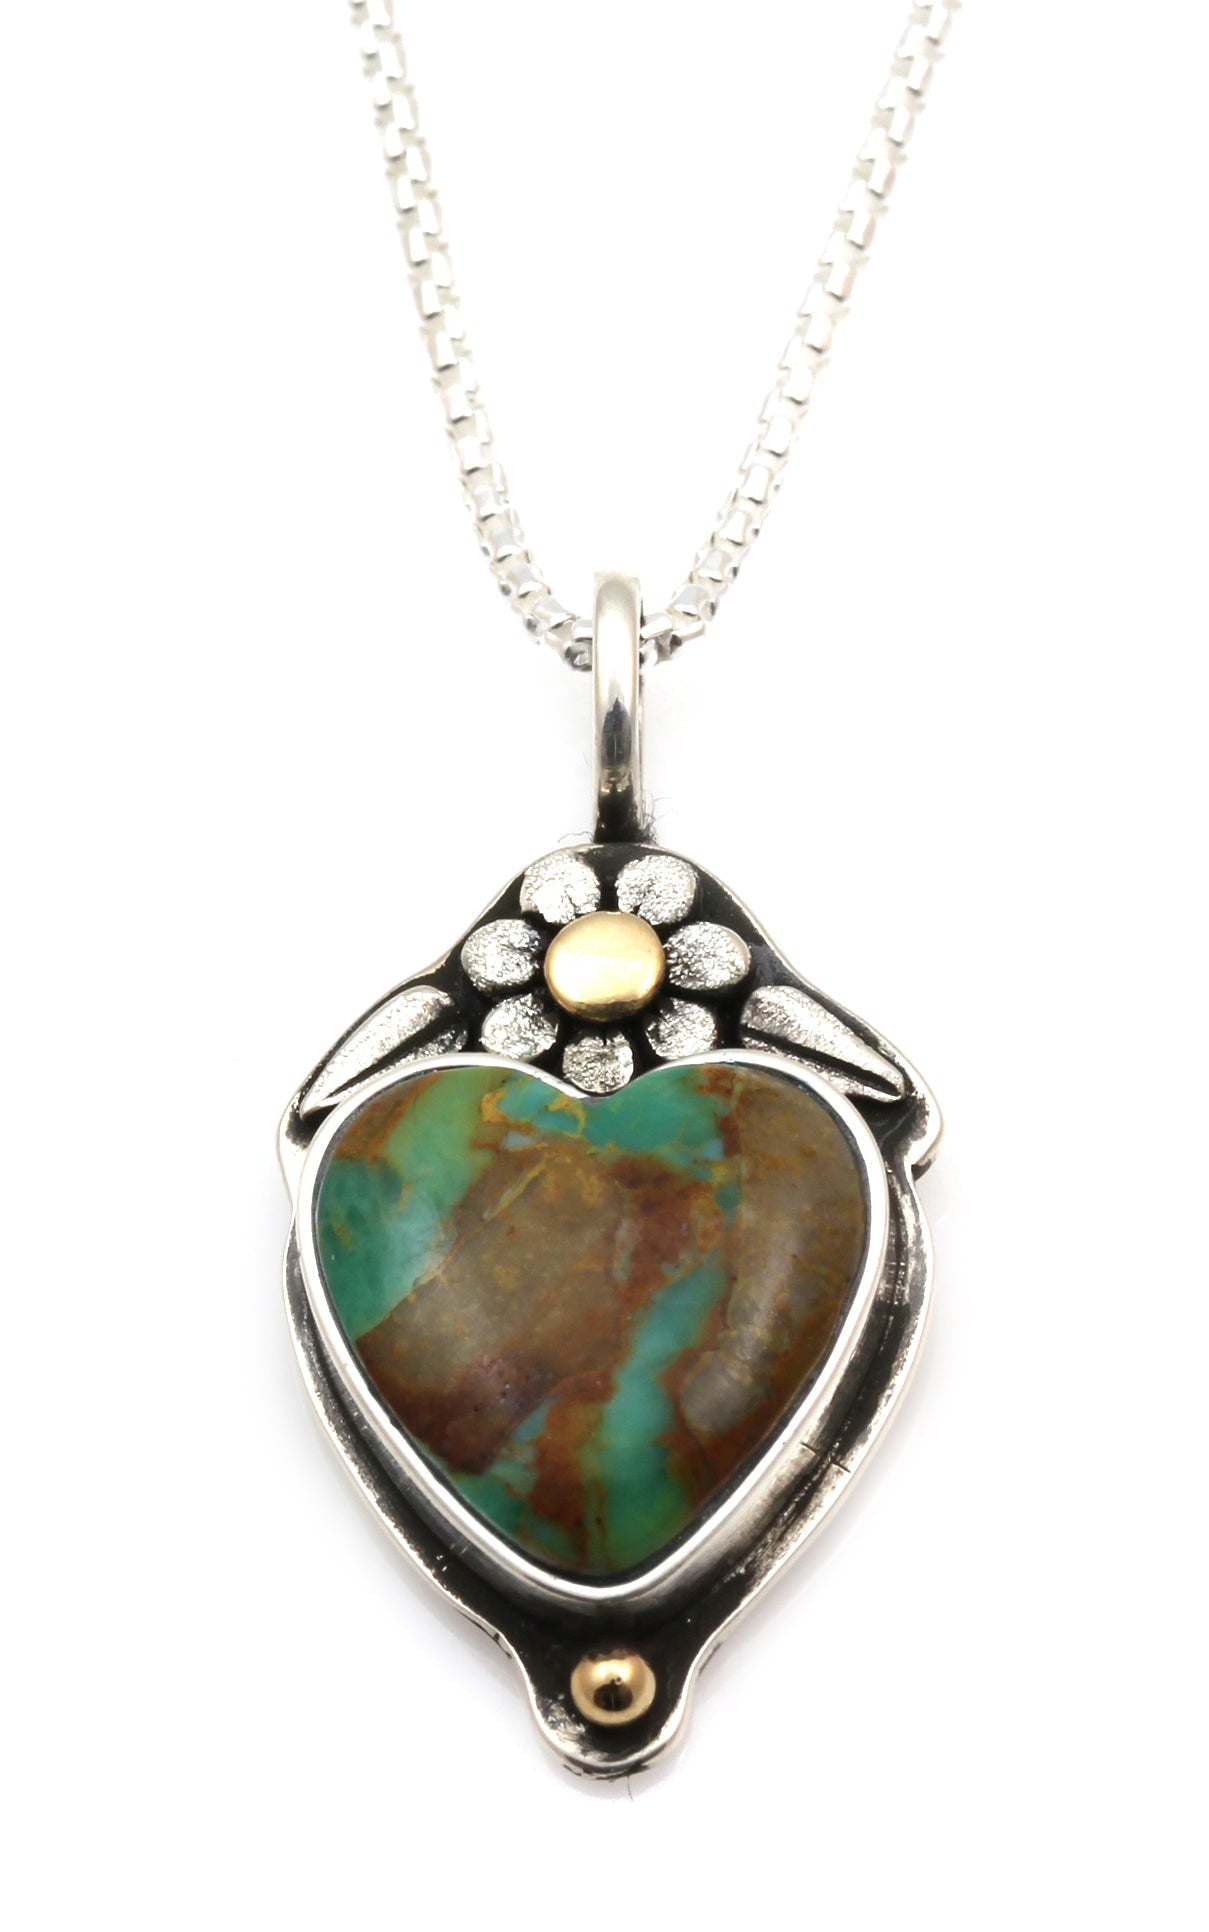 Small Turquoise Heart Pendant-Jewelry-Michelle Tapia-Sorrel Sky Gallery